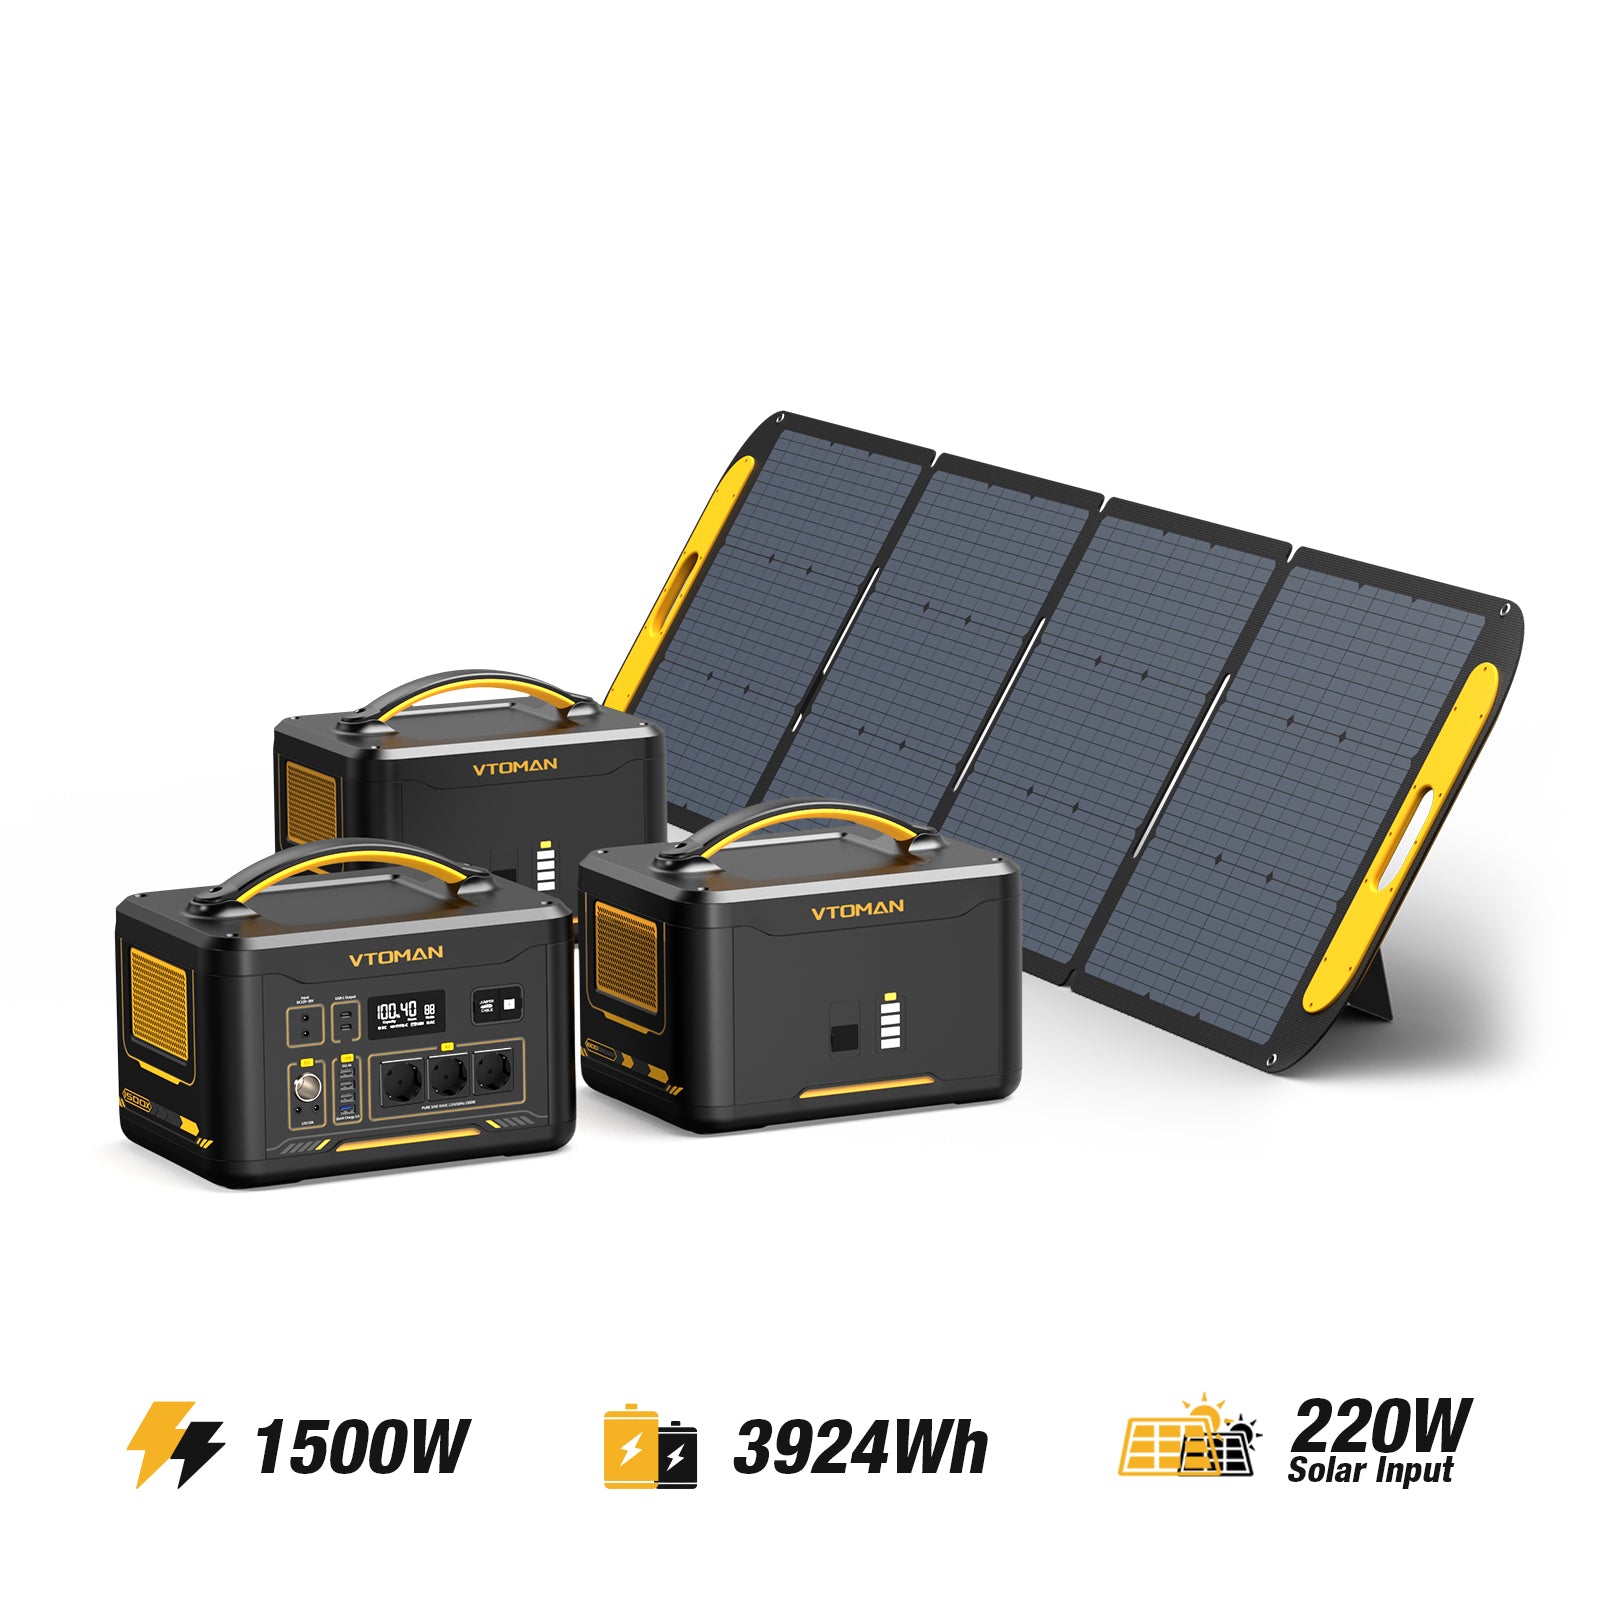 Jump 1500W/3924Wh 220W Solargenerator